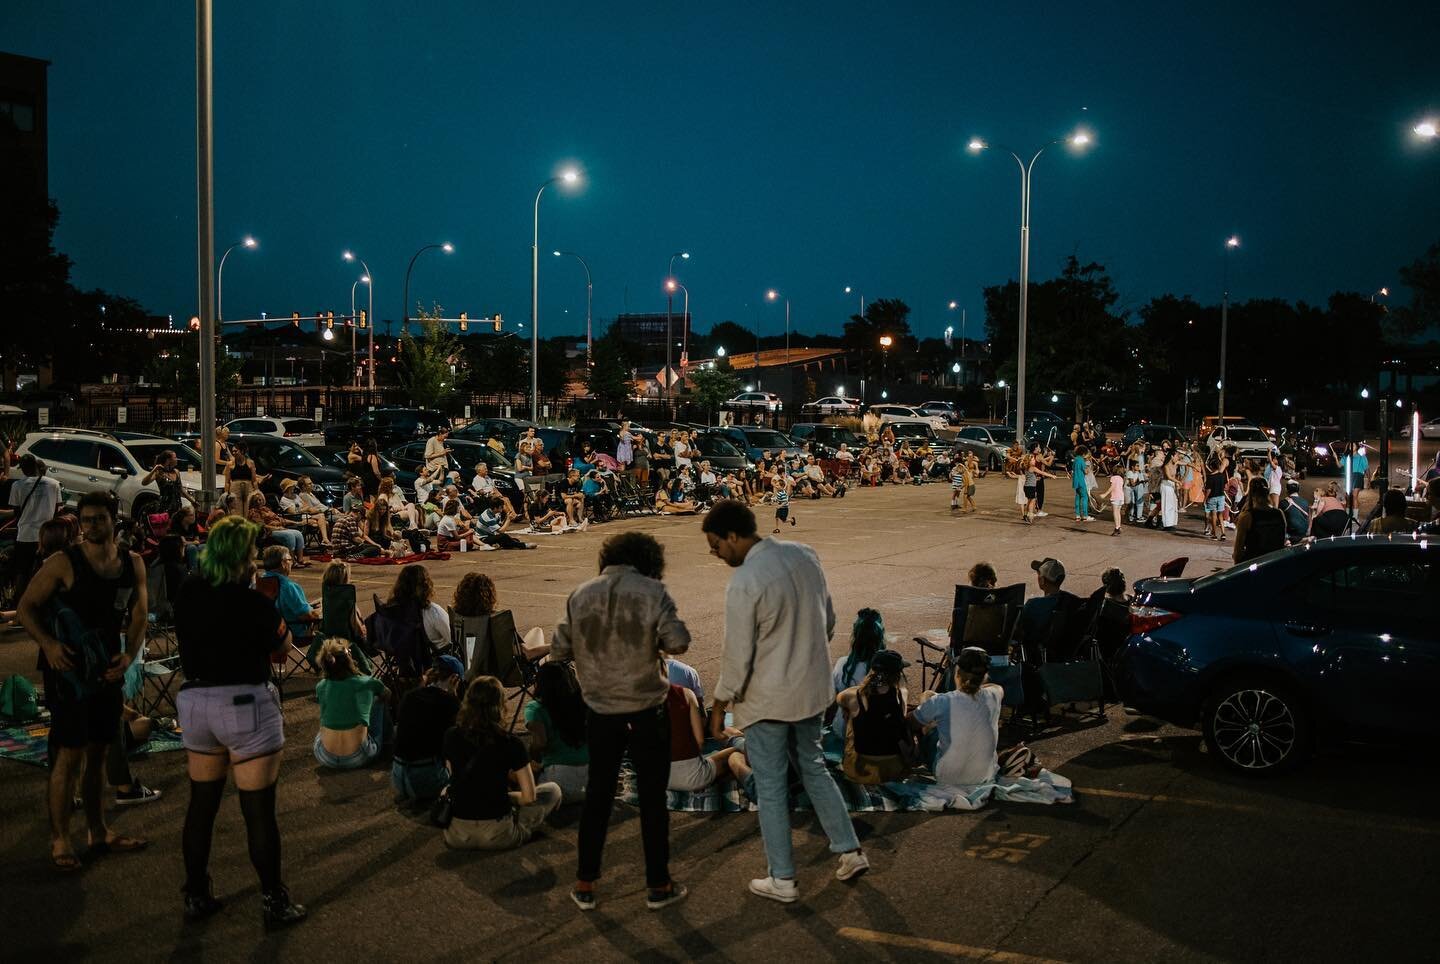 Huge thank you to everyone who came out Friday night and helped us transform another parking lot into the Headlights Theater💕 this show would not have been possible with out @elsa_rae and company, our NYC Professional Dancers (@maddy_elliott, @raech